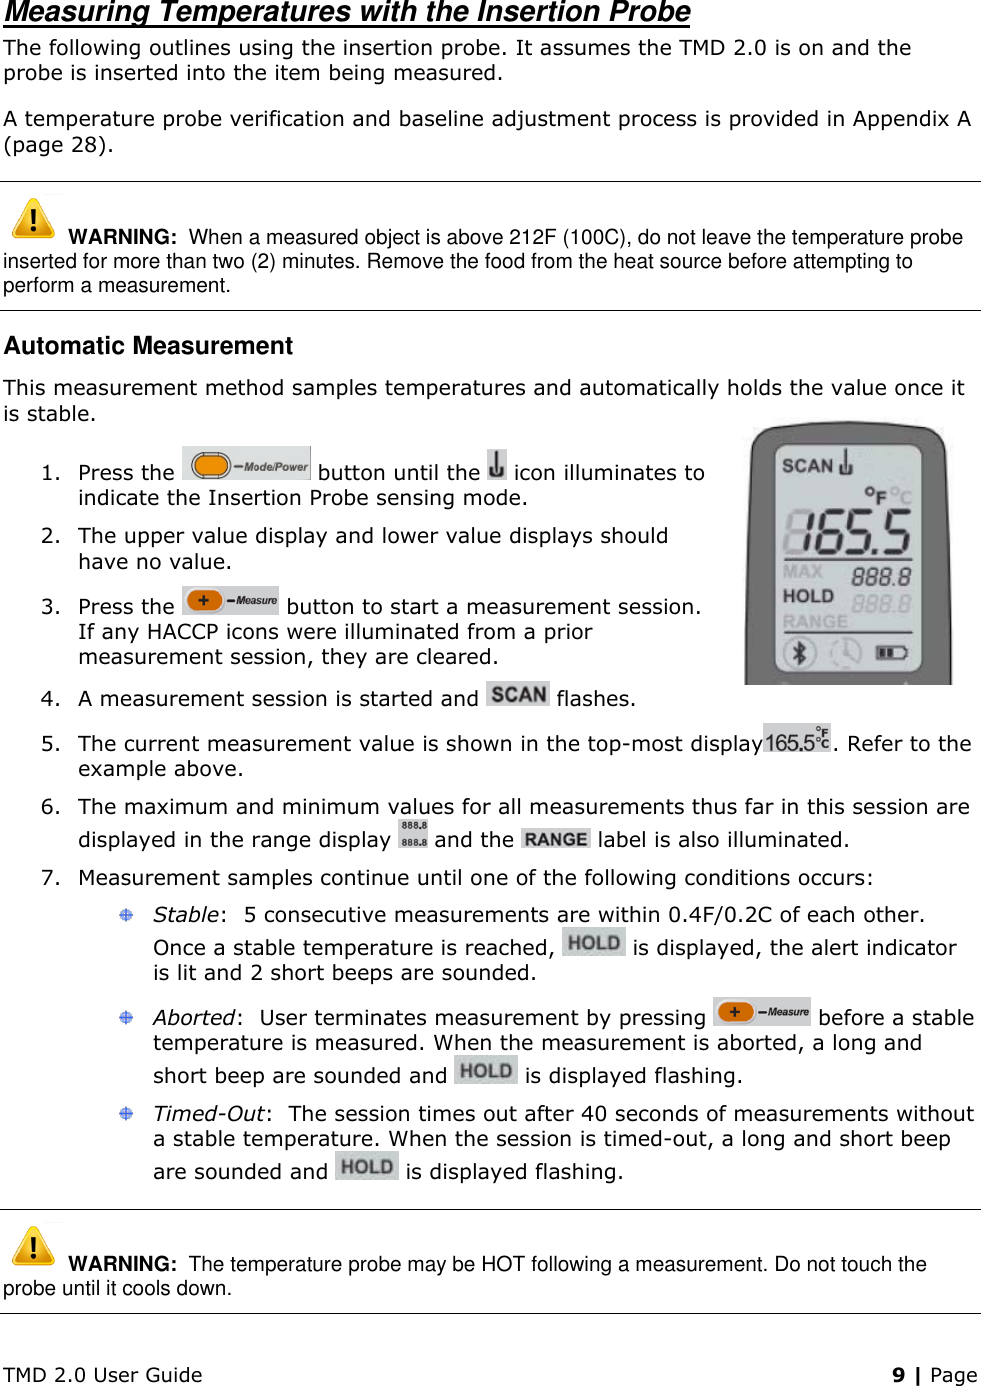 TMD 2.0 User Guide    9 | Page Measuring Temperatures with the Insertion Probe The following outlines using the insertion probe. It assumes the TMD 2.0 is on and the probe is inserted into the item being measured. A temperature probe verification and baseline adjustment process is provided in Appendix A (page 28).  WARNING:  When a measured object is above 212F (100C), do not leave the temperature probe inserted for more than two (2) minutes. Remove the food from the heat source before attempting to perform a measurement. Automatic Measurement This measurement method samples temperatures and automatically holds the value once it is stable. 1. Press the   button until the   icon illuminates to indicate the Insertion Probe sensing mode.  2. The upper value display and lower value displays should have no value. 3. Press the   button to start a measurement session. If any HACCP icons were illuminated from a prior measurement session, they are cleared. 4. A measurement session is started and   flashes. 5. The current measurement value is shown in the top-most display . Refer to the example above. 6. The maximum and minimum values for all measurements thus far in this session are displayed in the range display   and the   label is also illuminated. 7. Measurement samples continue until one of the following conditions occurs:  Stable:  5 consecutive measurements are within 0.4F/0.2C of each other. Once a stable temperature is reached,   is displayed, the alert indicator is lit and 2 short beeps are sounded.  Aborted:  User terminates measurement by pressing   before a stable temperature is measured. When the measurement is aborted, a long and short beep are sounded and   is displayed flashing.  Timed-Out:  The session times out after 40 seconds of measurements without a stable temperature. When the session is timed-out, a long and short beep are sounded and   is displayed flashing.  WARNING:  The temperature probe may be HOT following a measurement. Do not touch the probe until it cools down. 